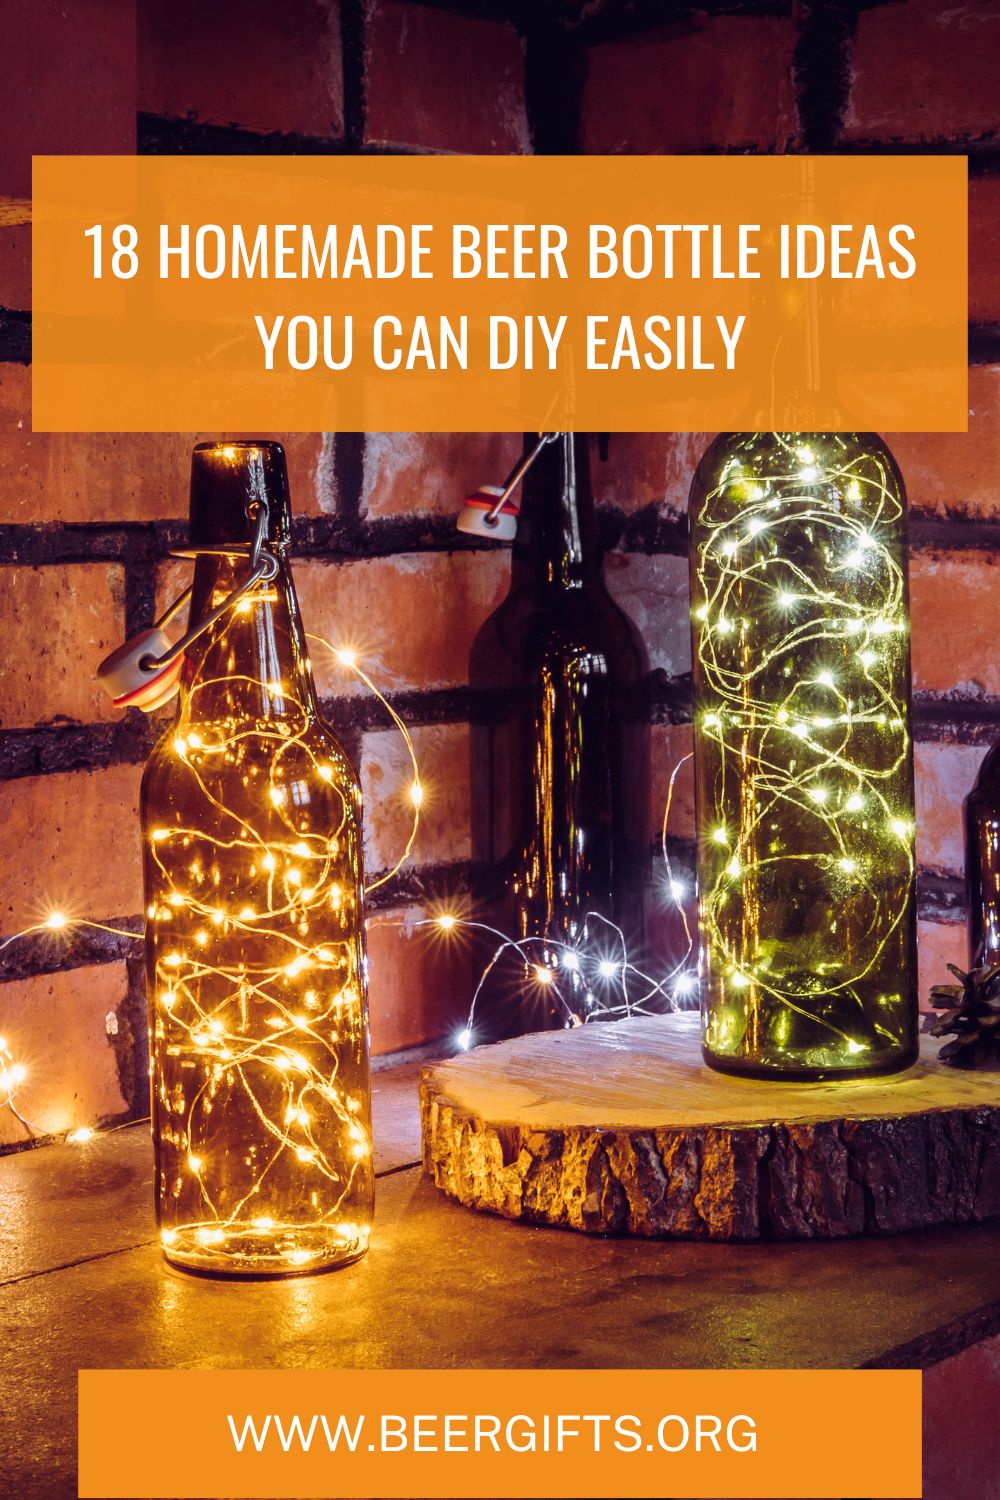 18 Homemade Beer Bottle Ideas You Can DIY Easily1